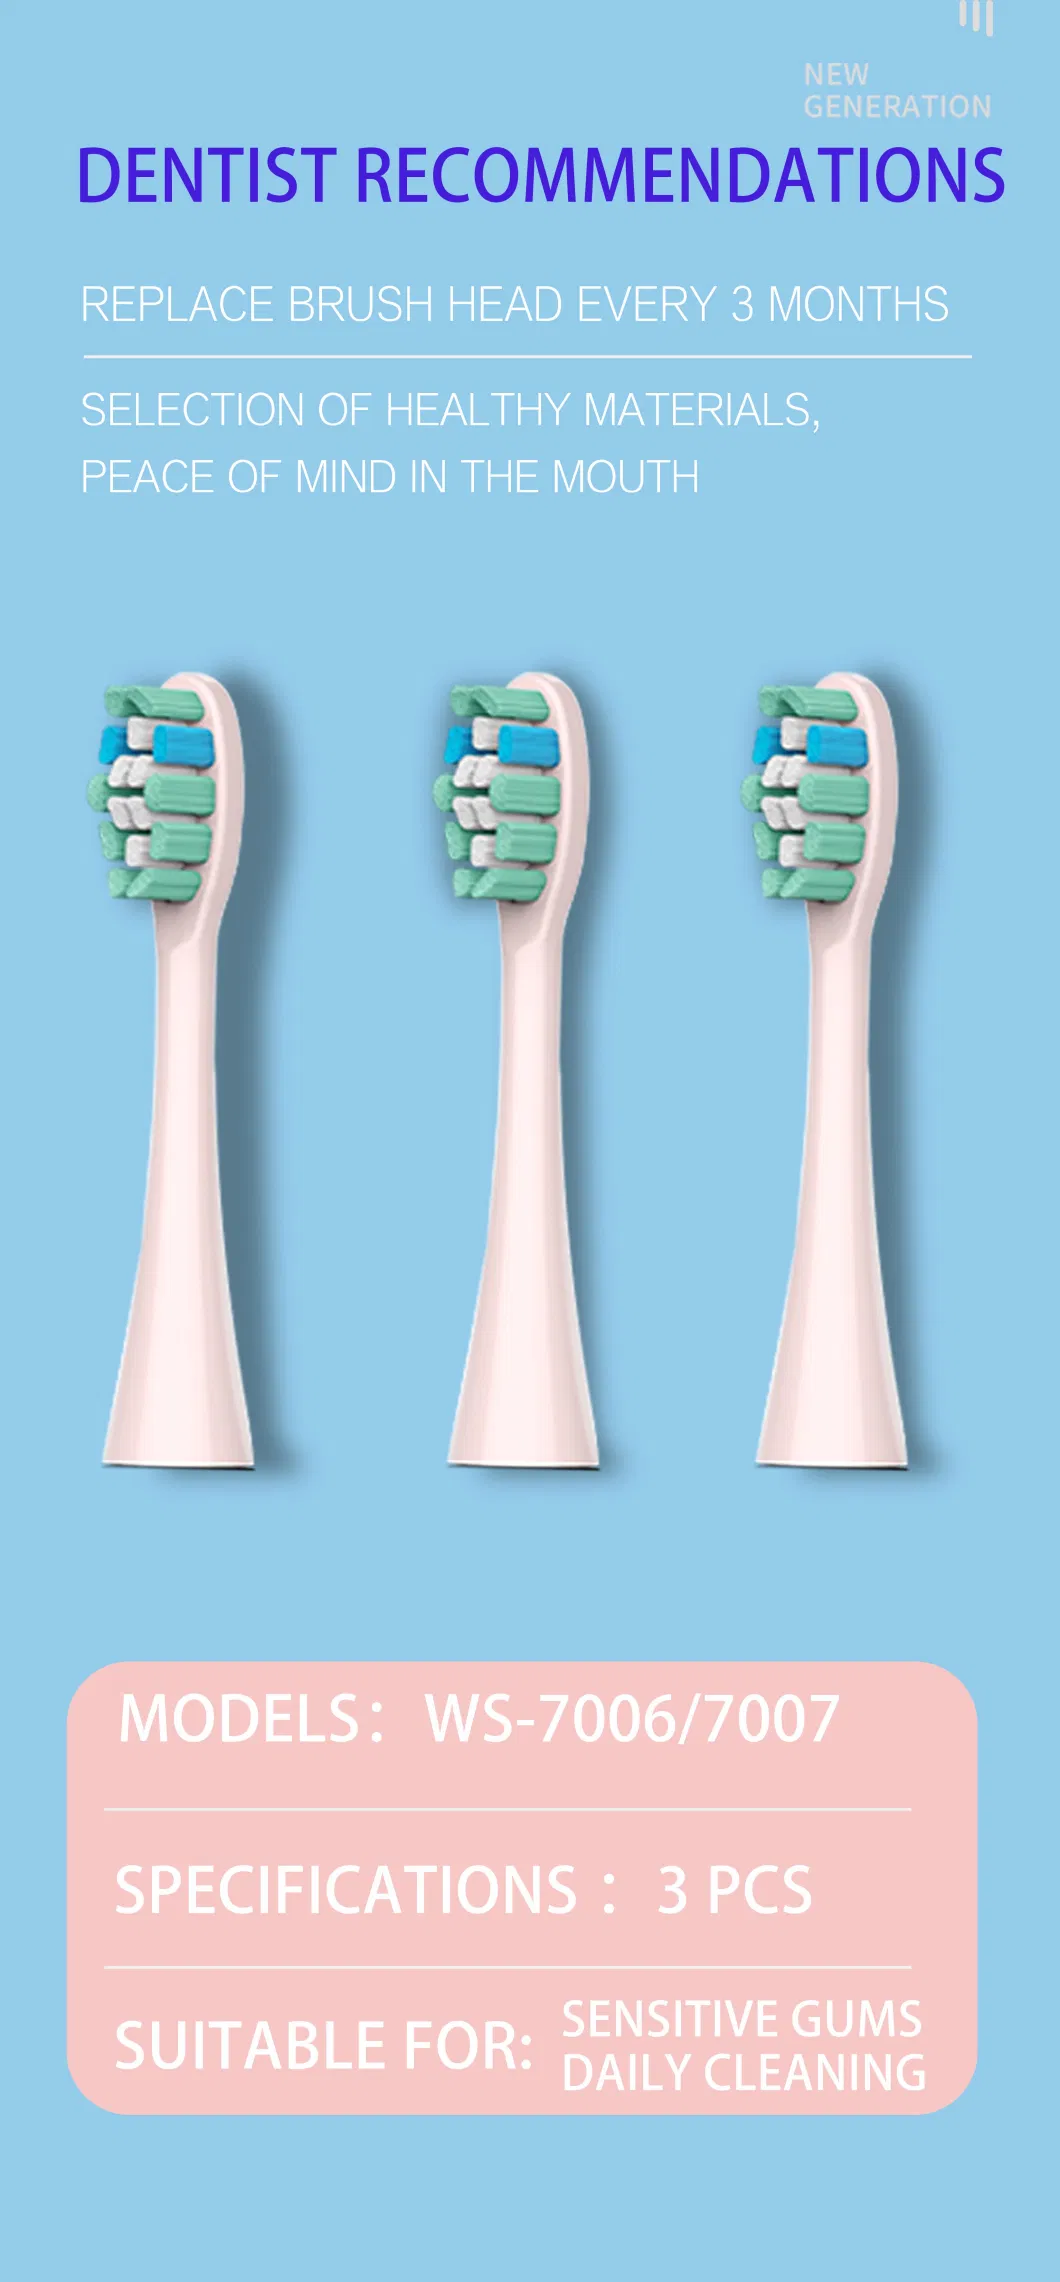 Replacement Electric Toothbrush Head for Superior Oral Care